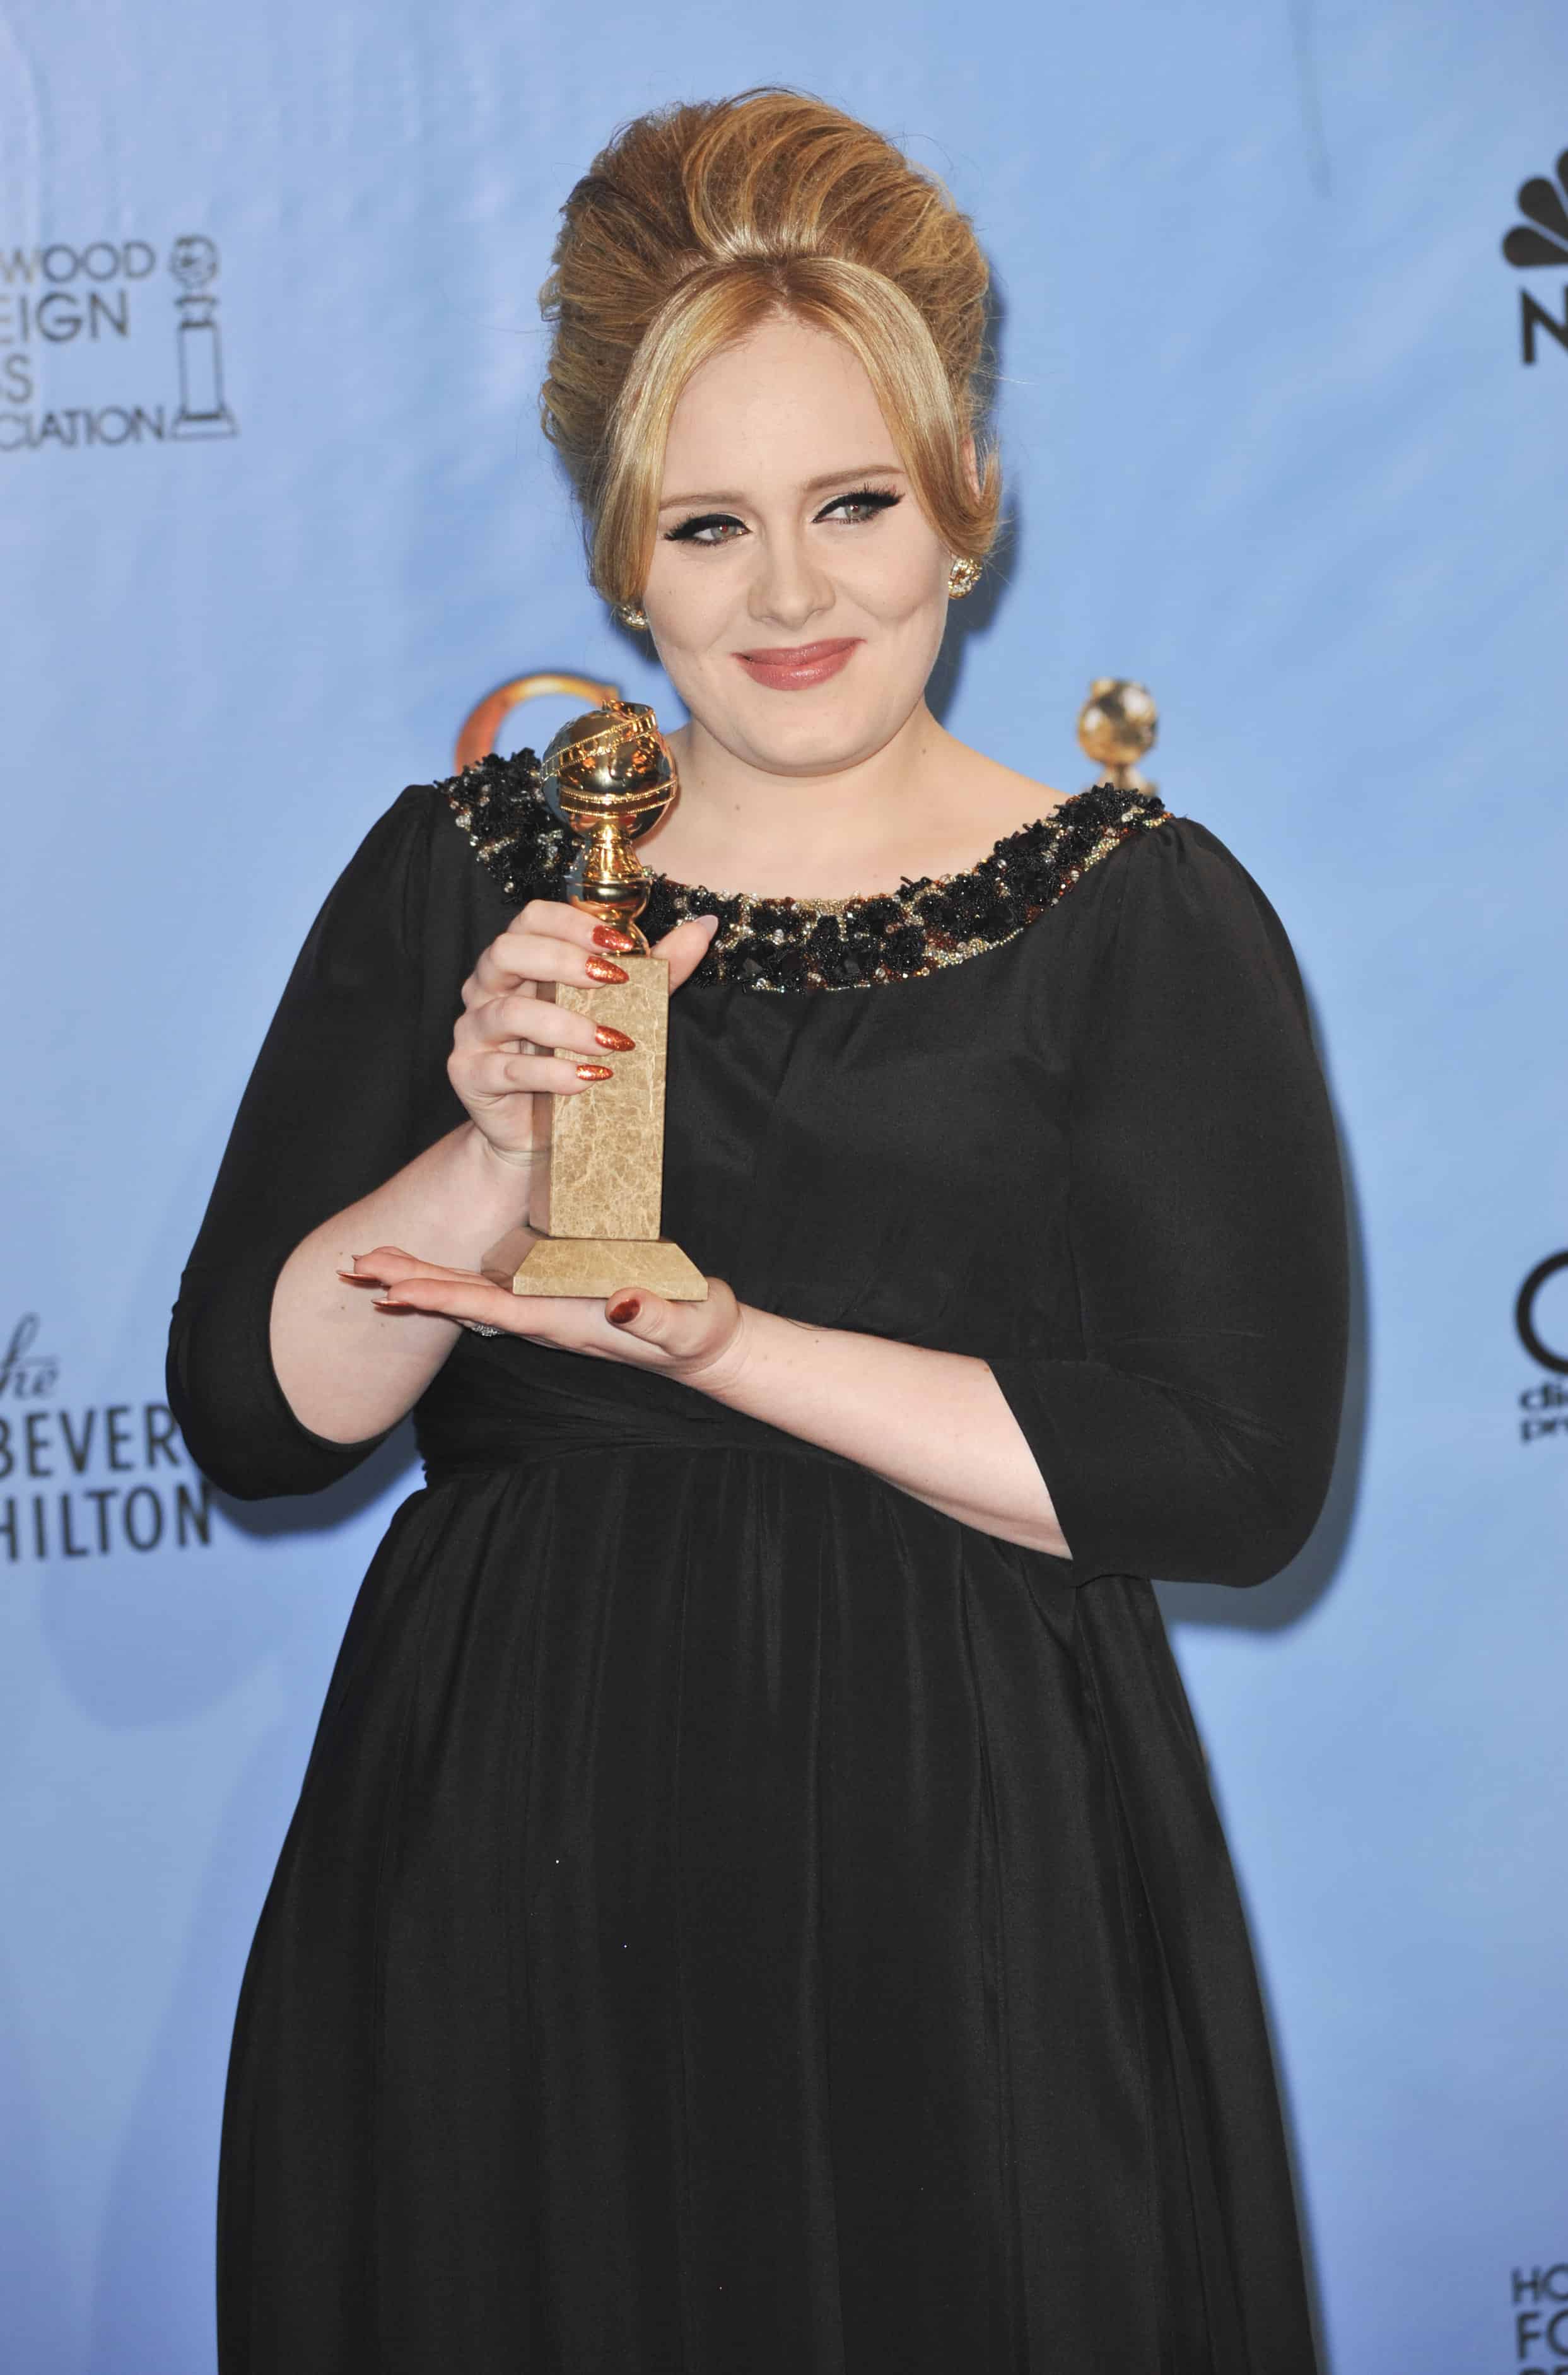 70th Annual Golden Globe Awards held at the Beverly Hilton Hotel